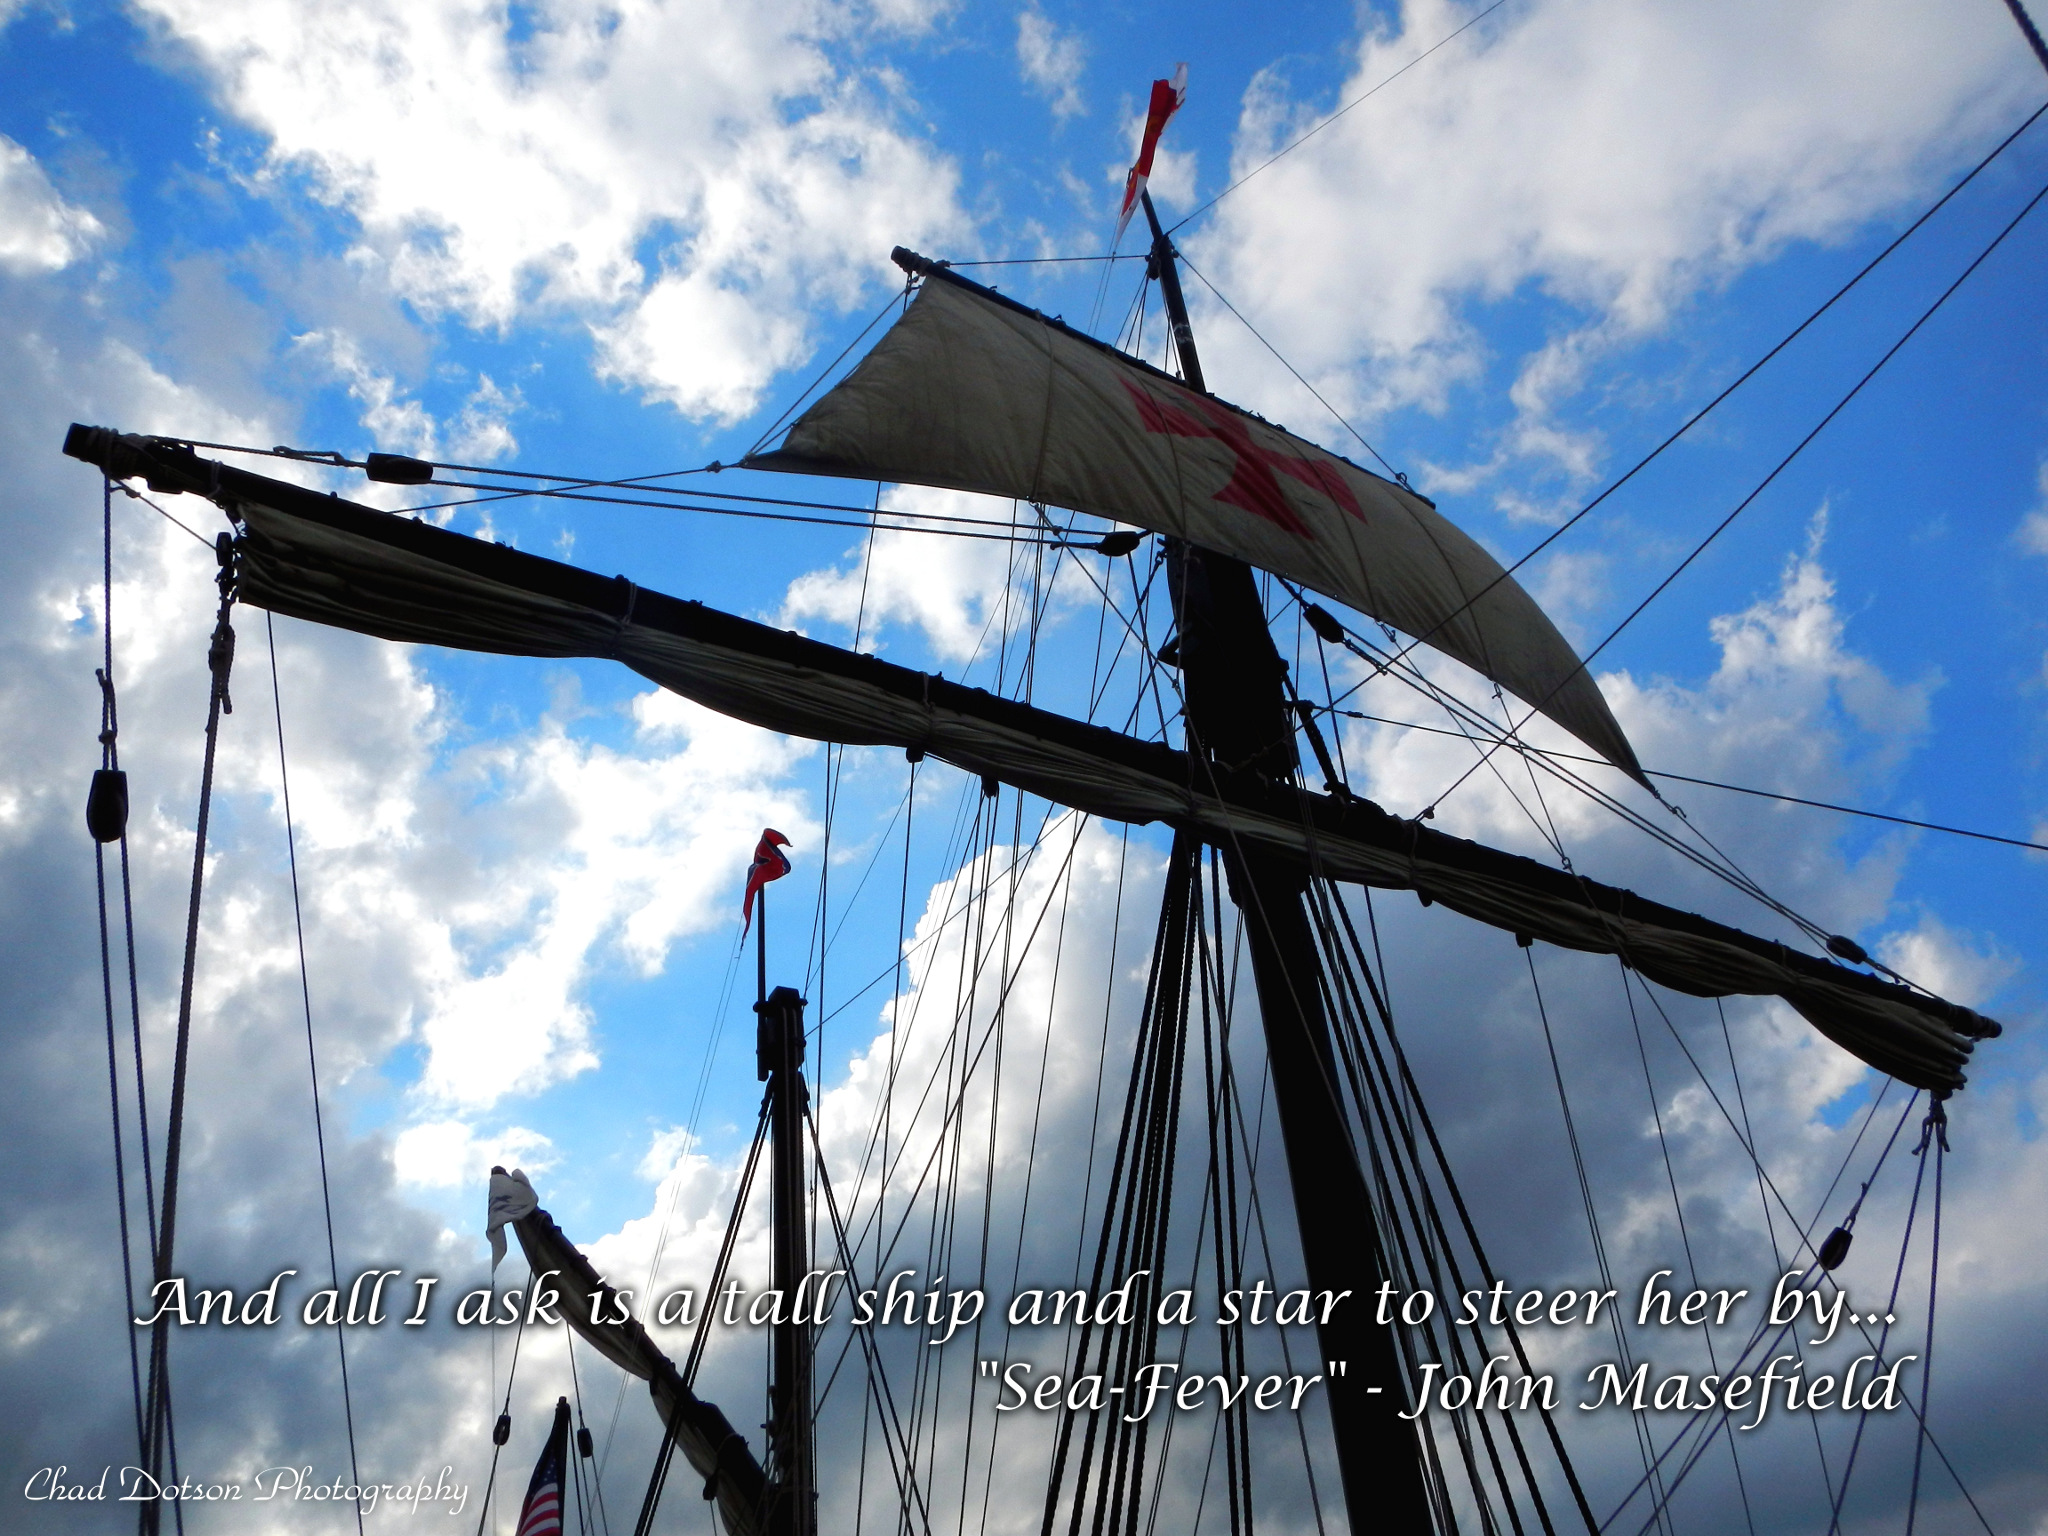 And all I ask is a tall ship and a star to steer her by…